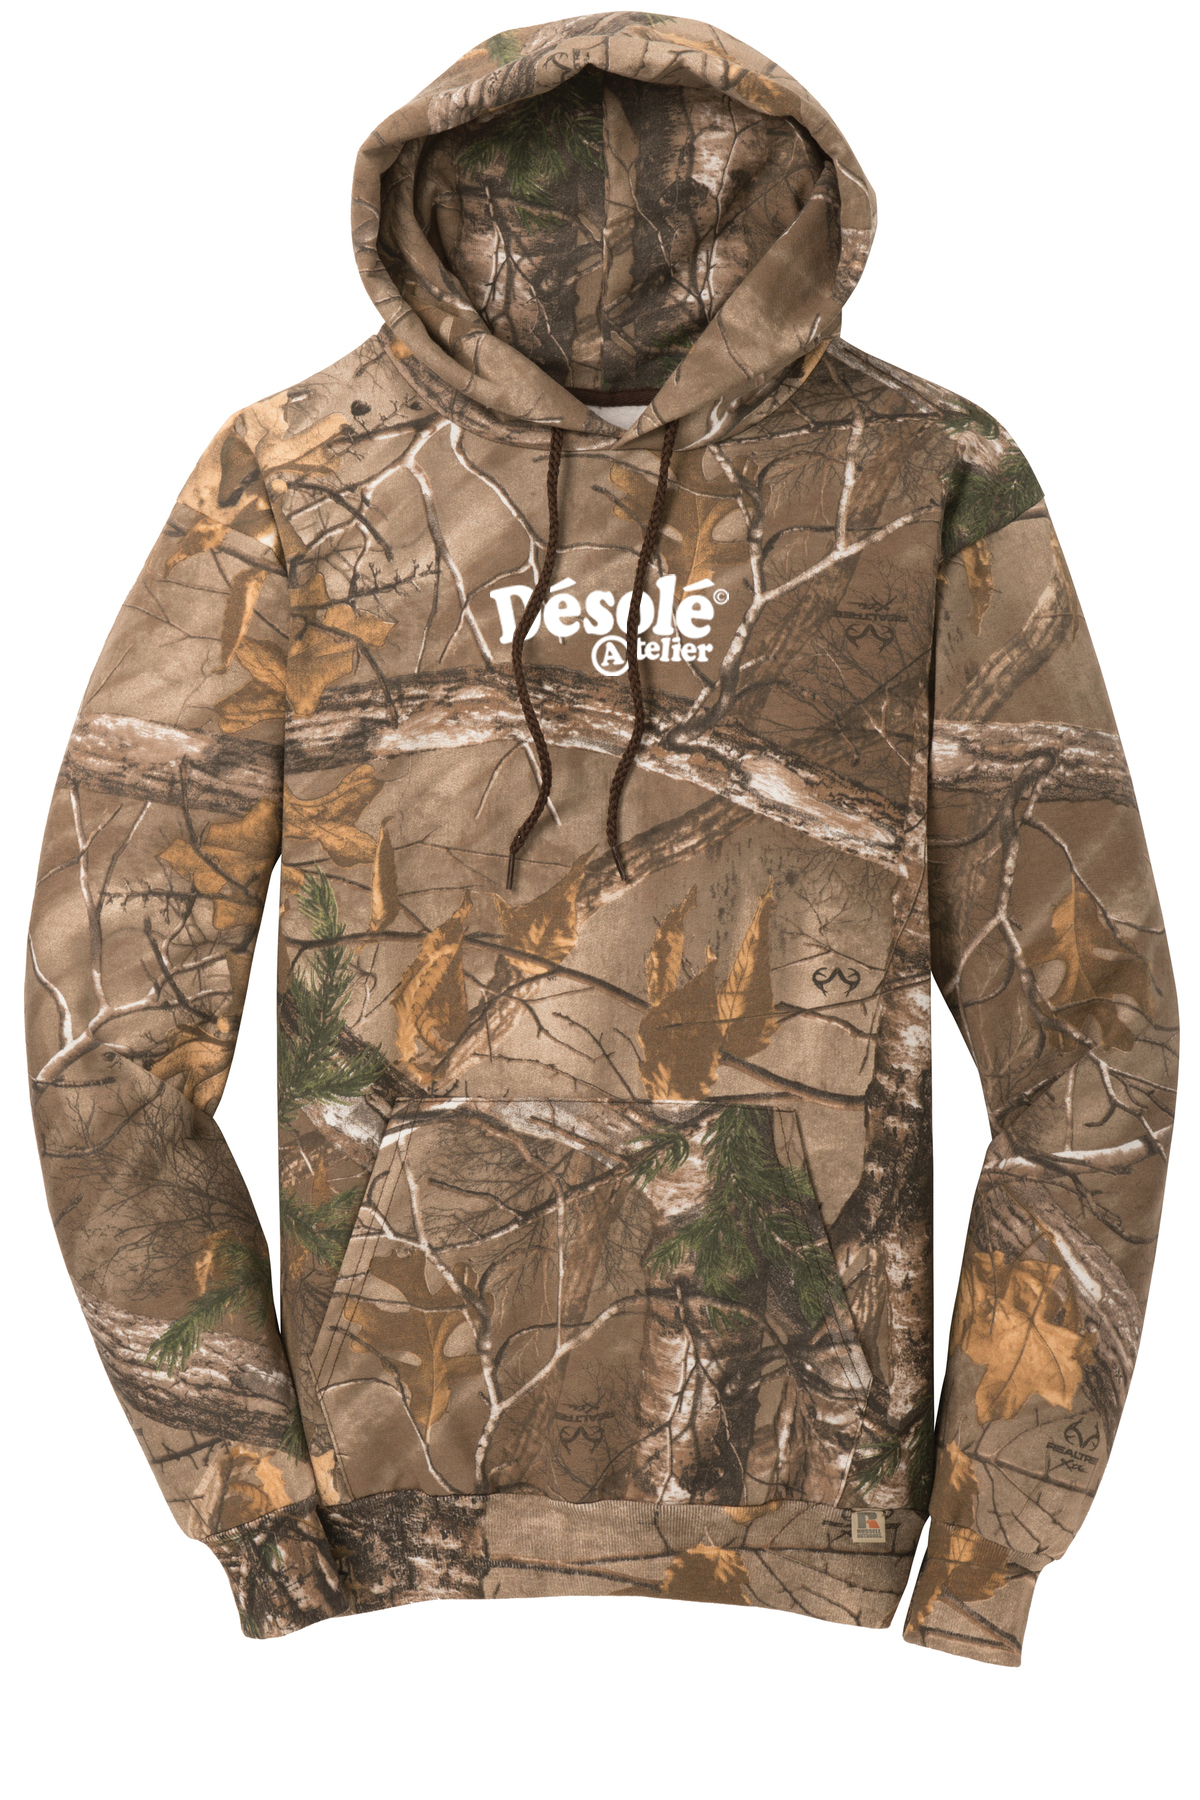 custom design of Russell Outdoors  Realtree  S459R - Pullover Hooded Sweatshirt